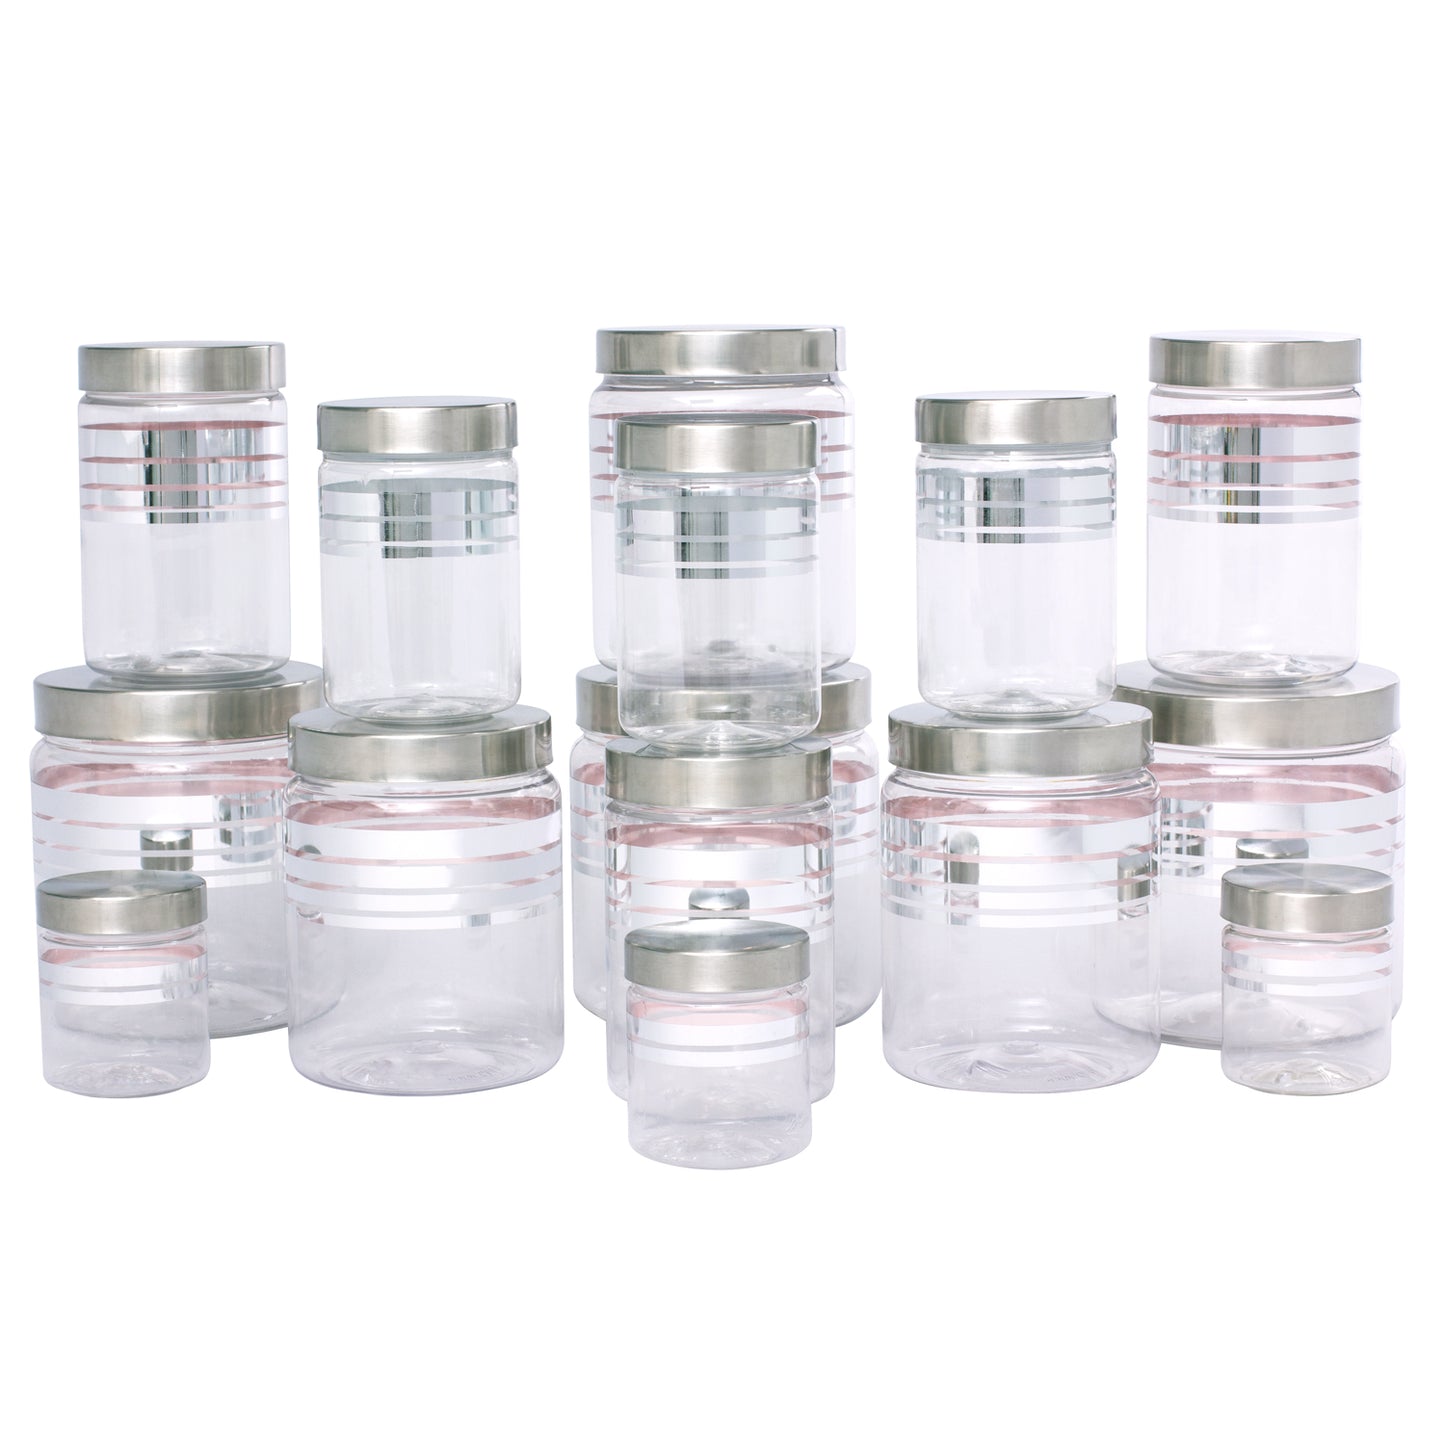 Silver Line Container - Pack of 15 - 1500ml, 1000ml, 450ml, 200ml, 50ml